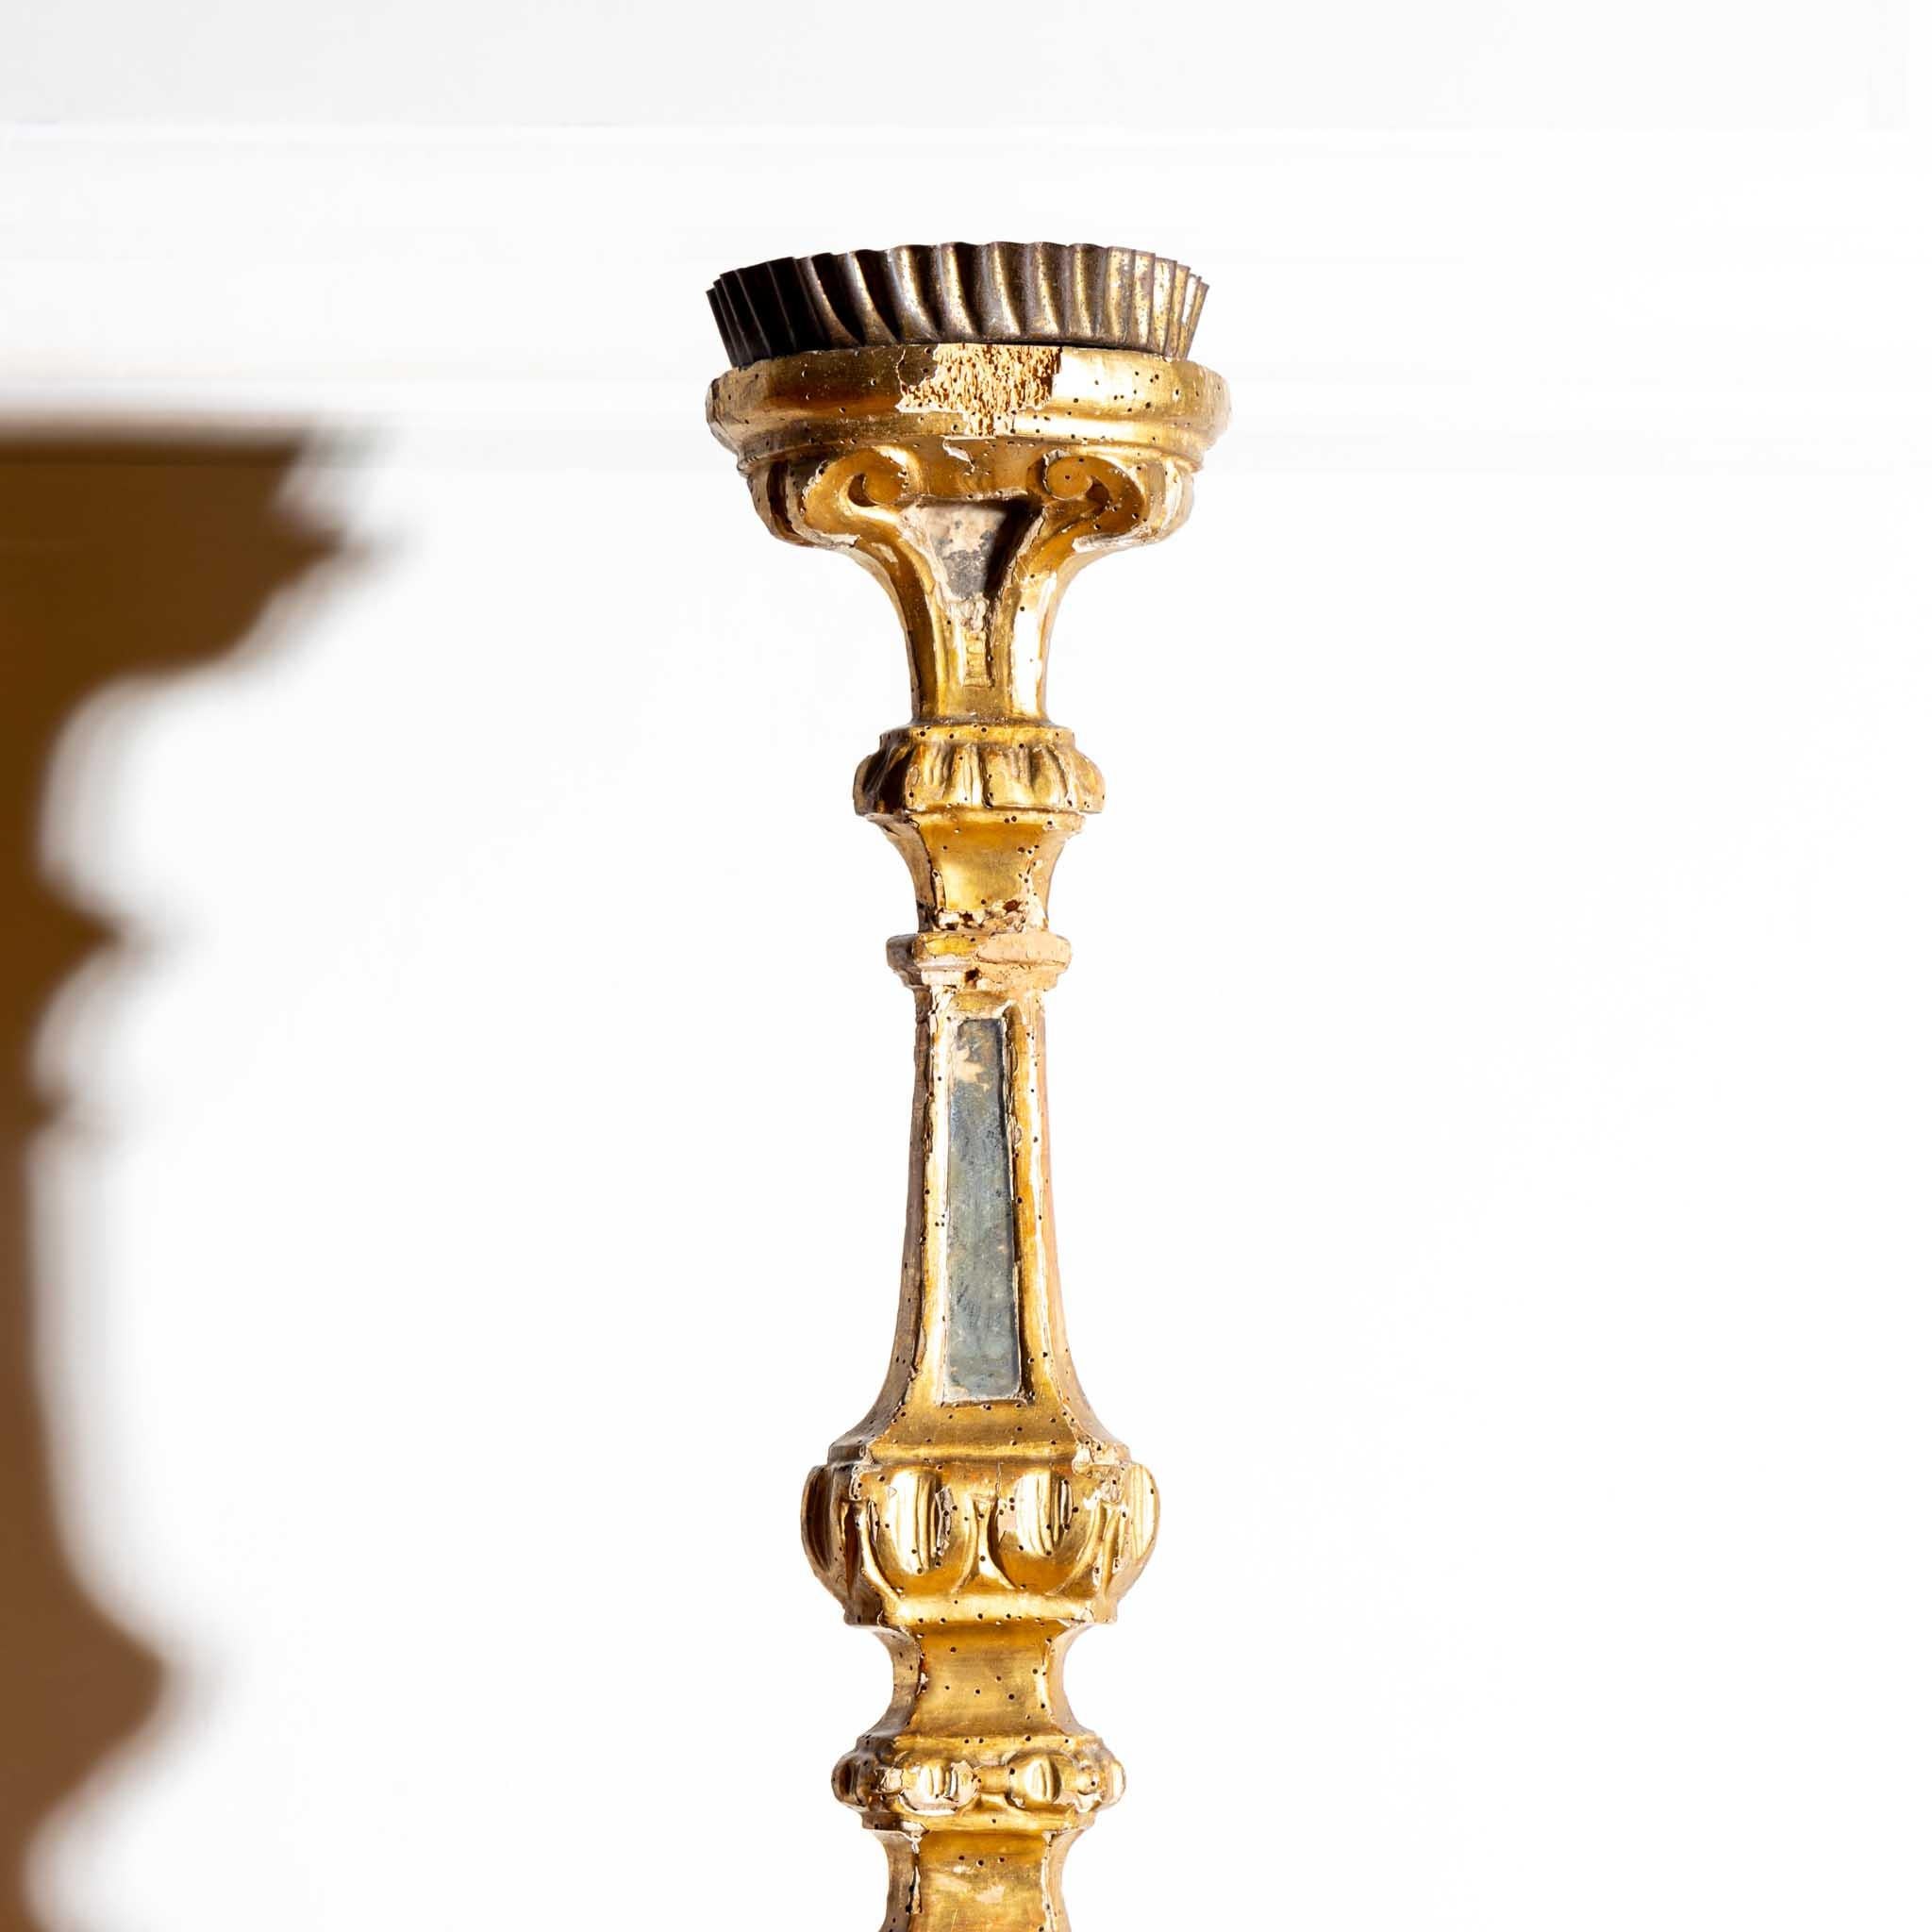 Baroque altar candlestick with a three-legged stand and a balustered shaft with a gold-patinated and dark accentuated setting and a wavy brass spout. The frame is bumped in places, traces of former woodworm infestation.